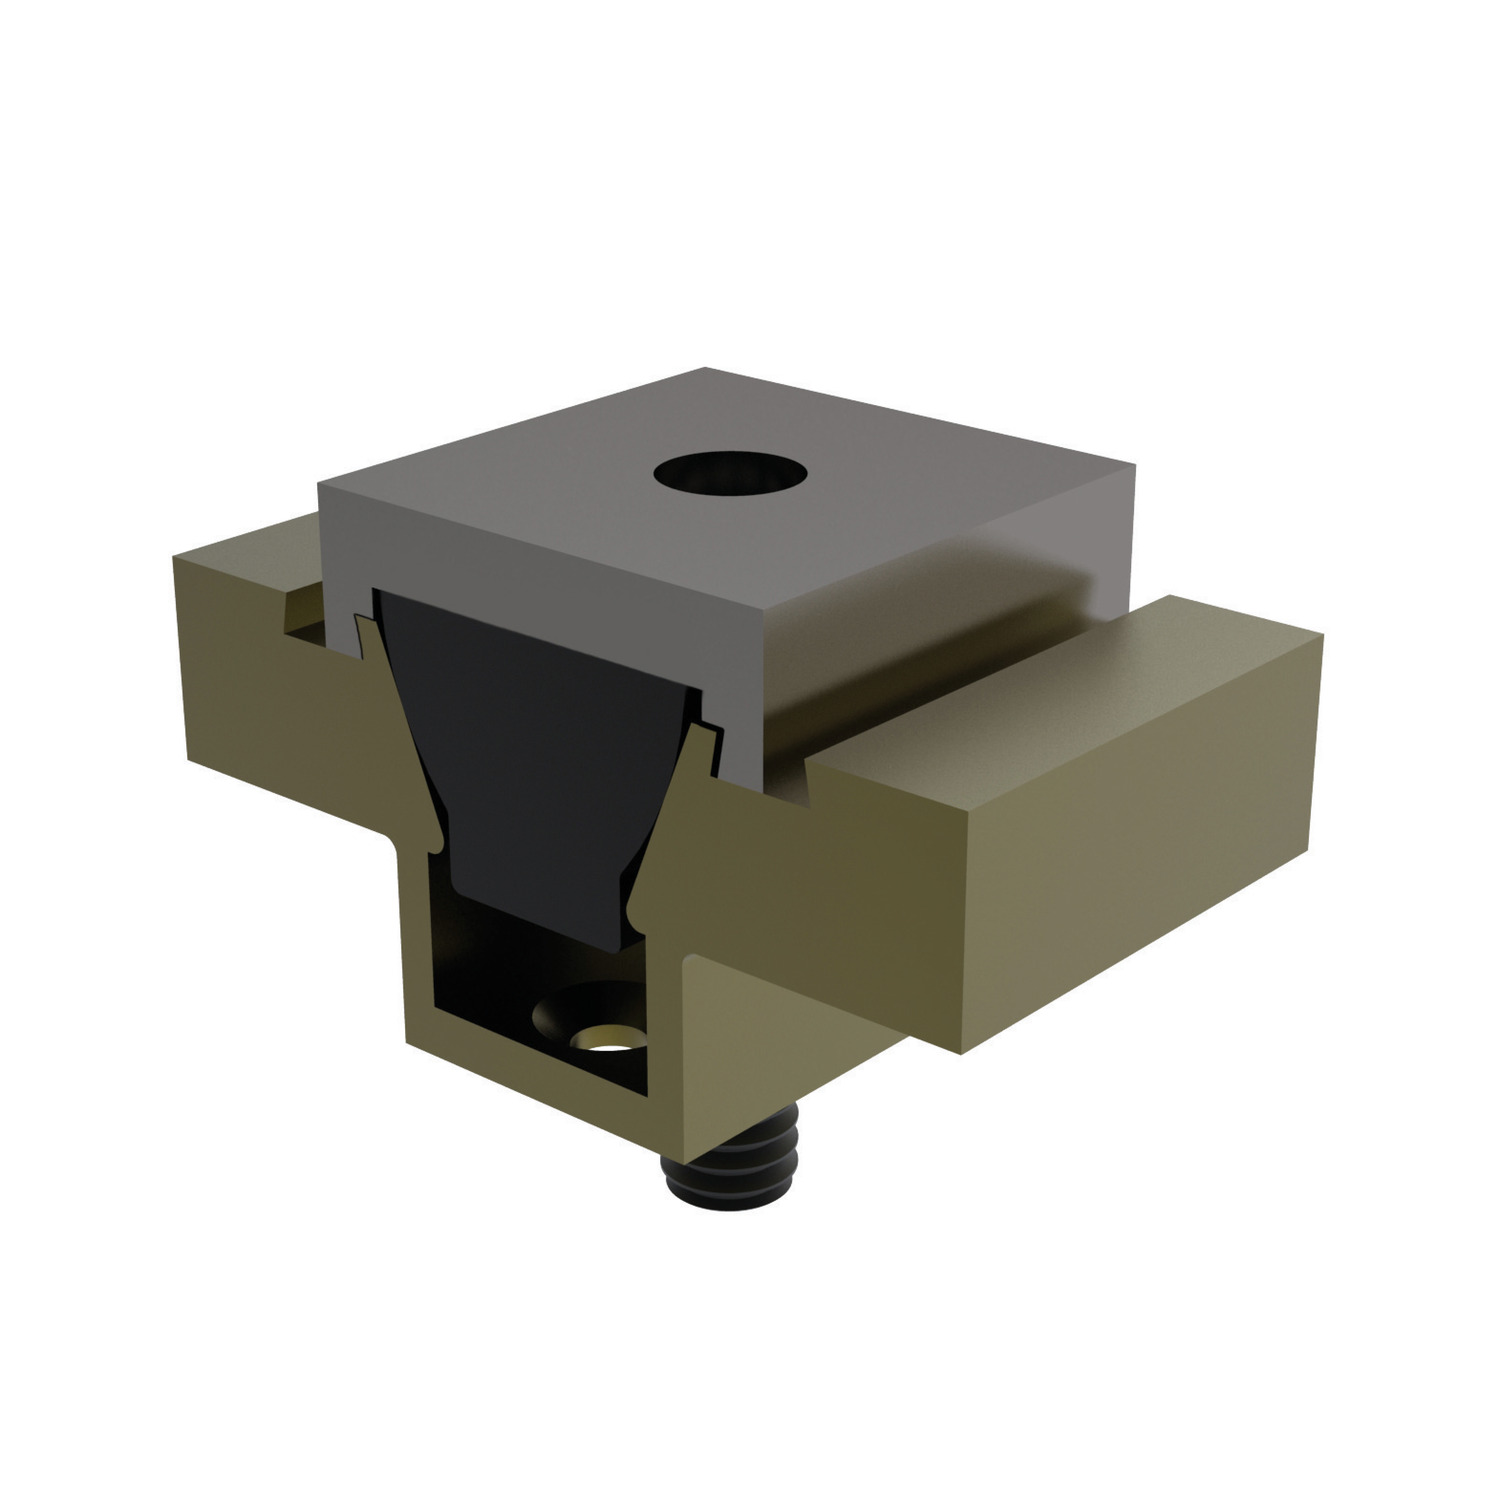 Machinable Uniforce Clamps The Mitee-Bite Machinable Uniforce Clamps work on the same basis are the normal uniforce, but allow you to machine the face of the jaw to suit the workpiece.